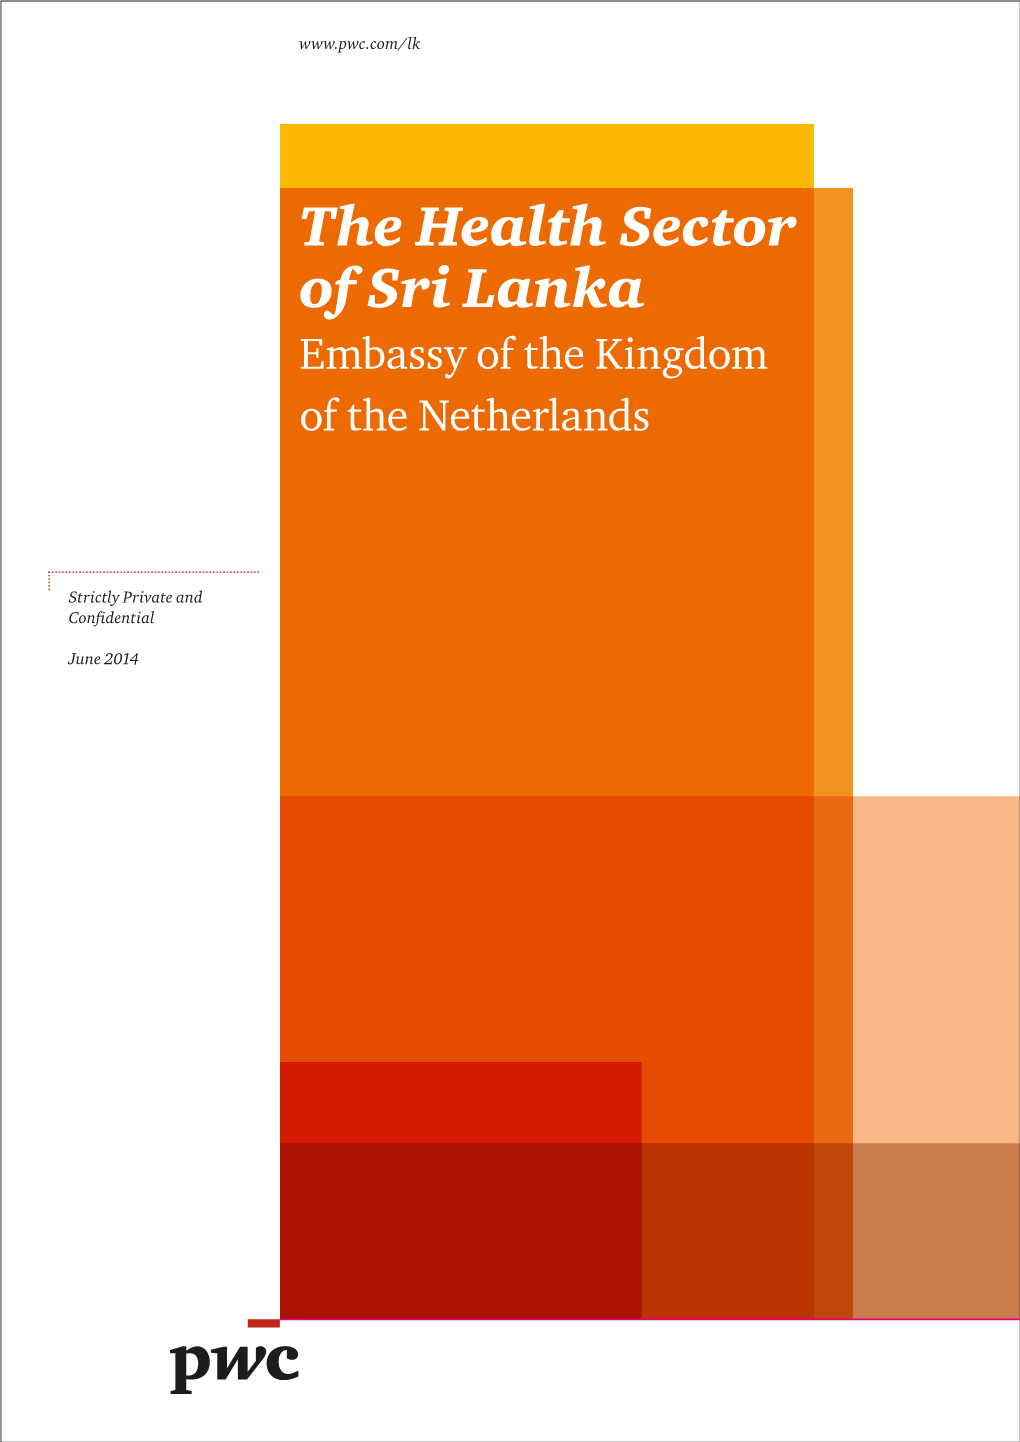 The Health Sector of Sri Lanka Embassy of the Kingdom of the Netherlands